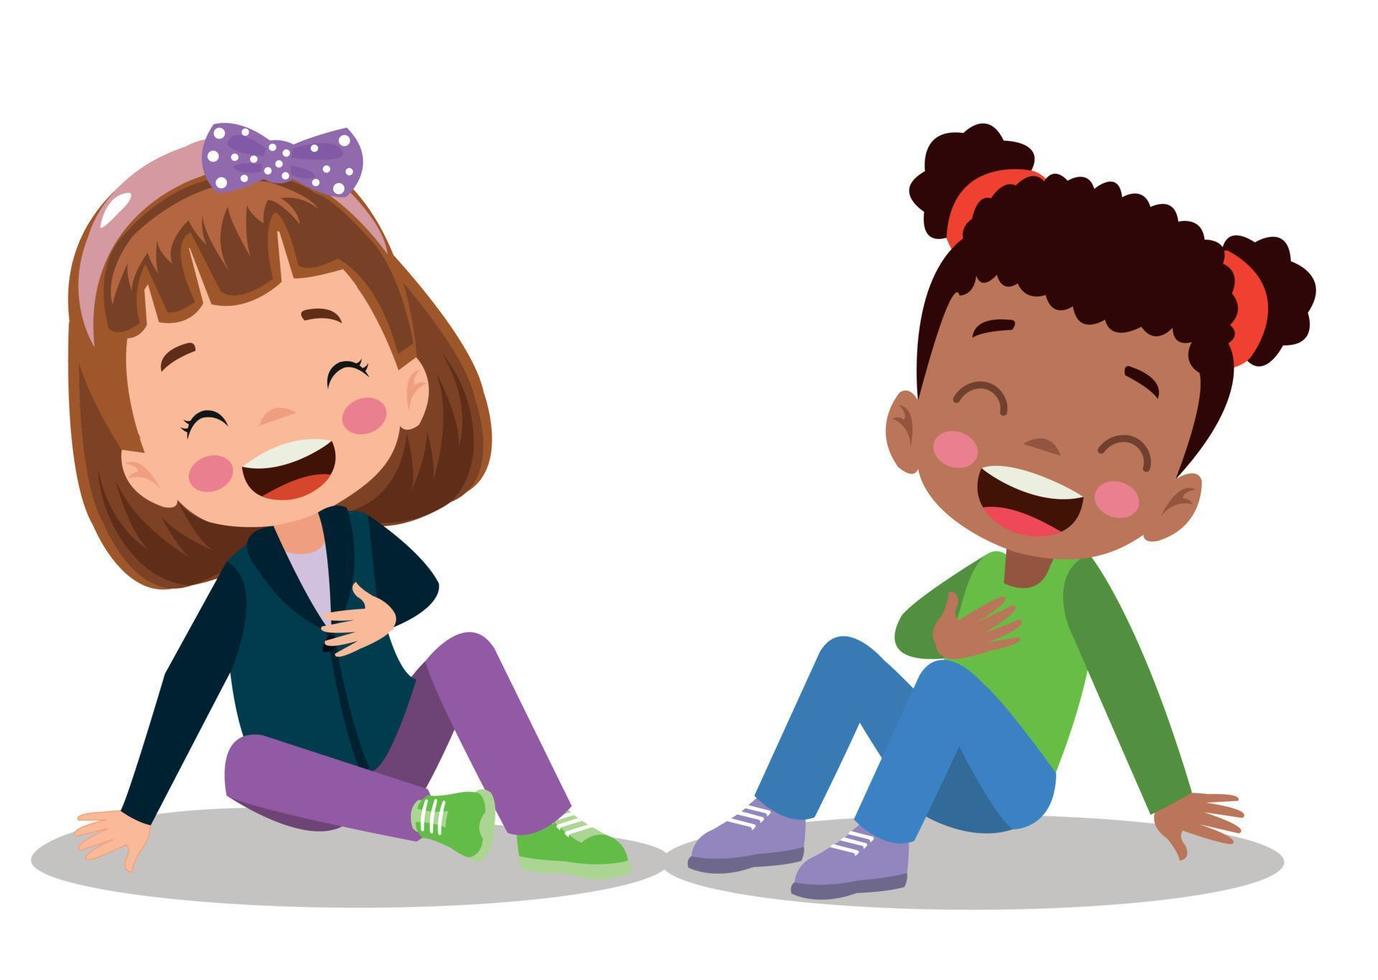 cute little boy laugh together with friend vector